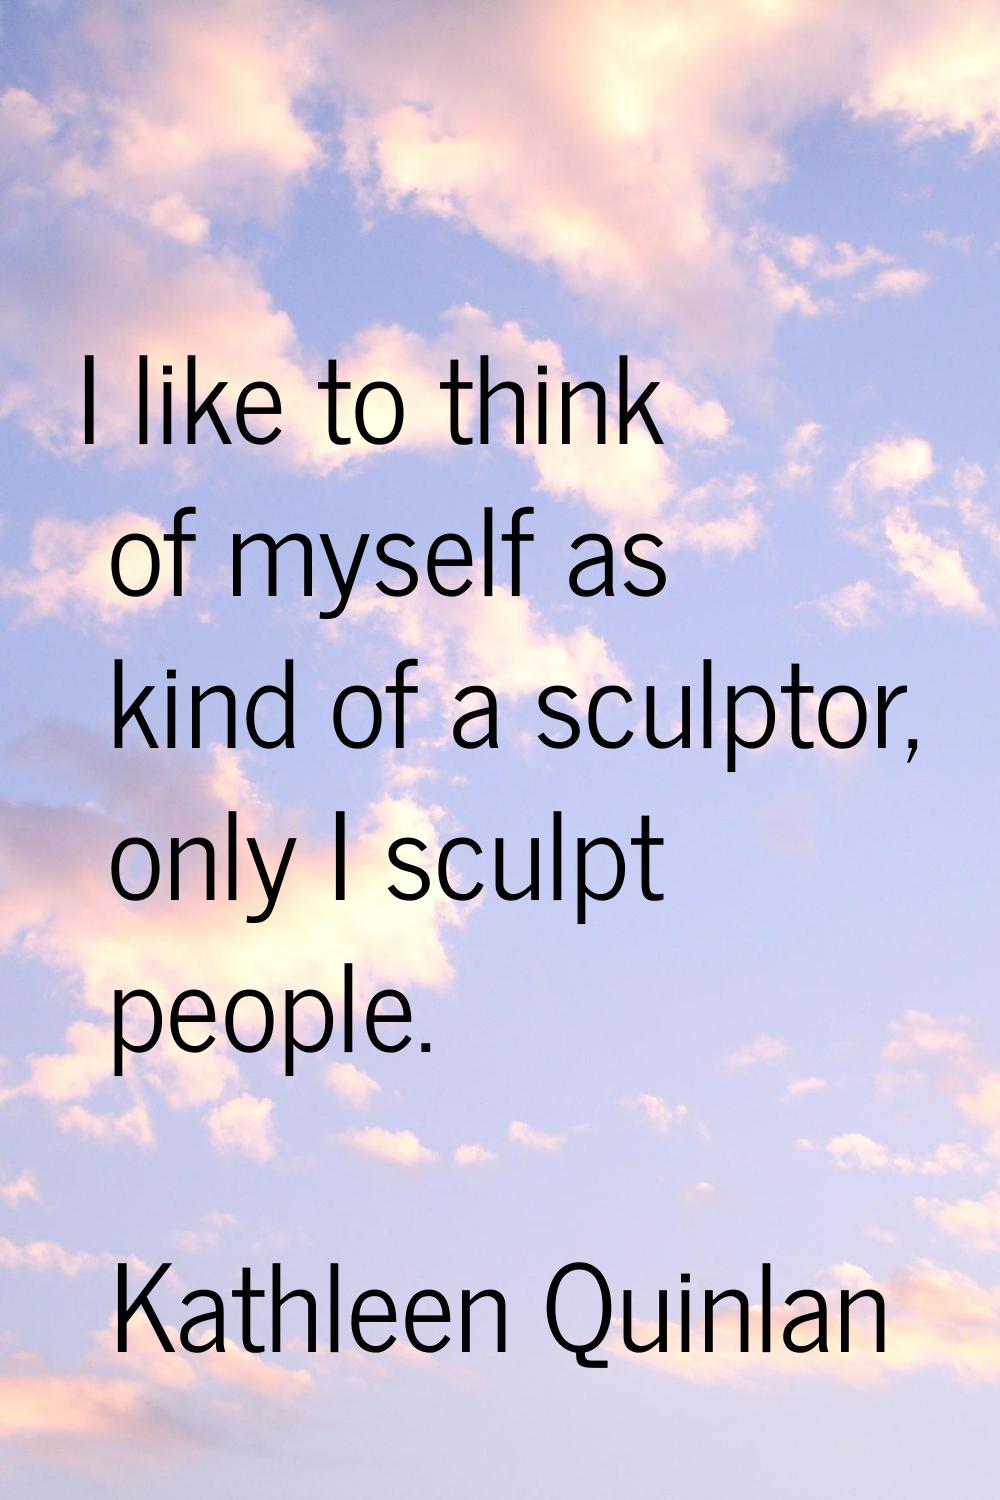 I like to think of myself as kind of a sculptor, only I sculpt people.